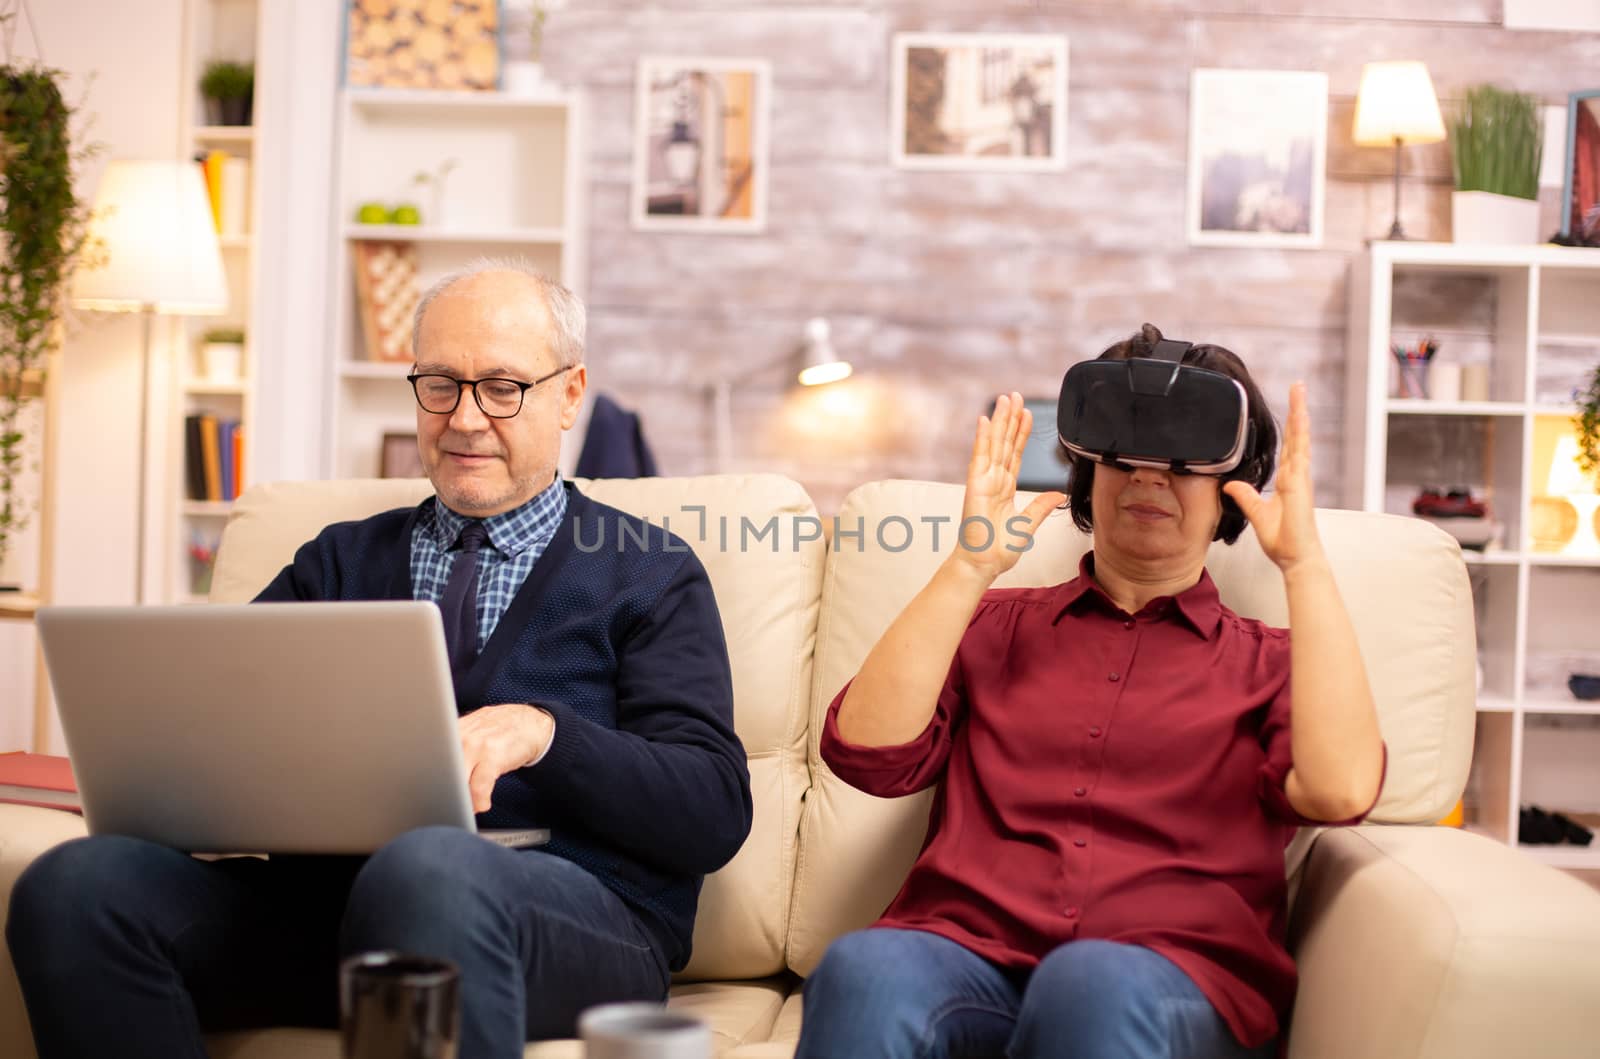 Old elderly retired woman in her 60s experiencing virtual reality for the first time in their cozy apartment